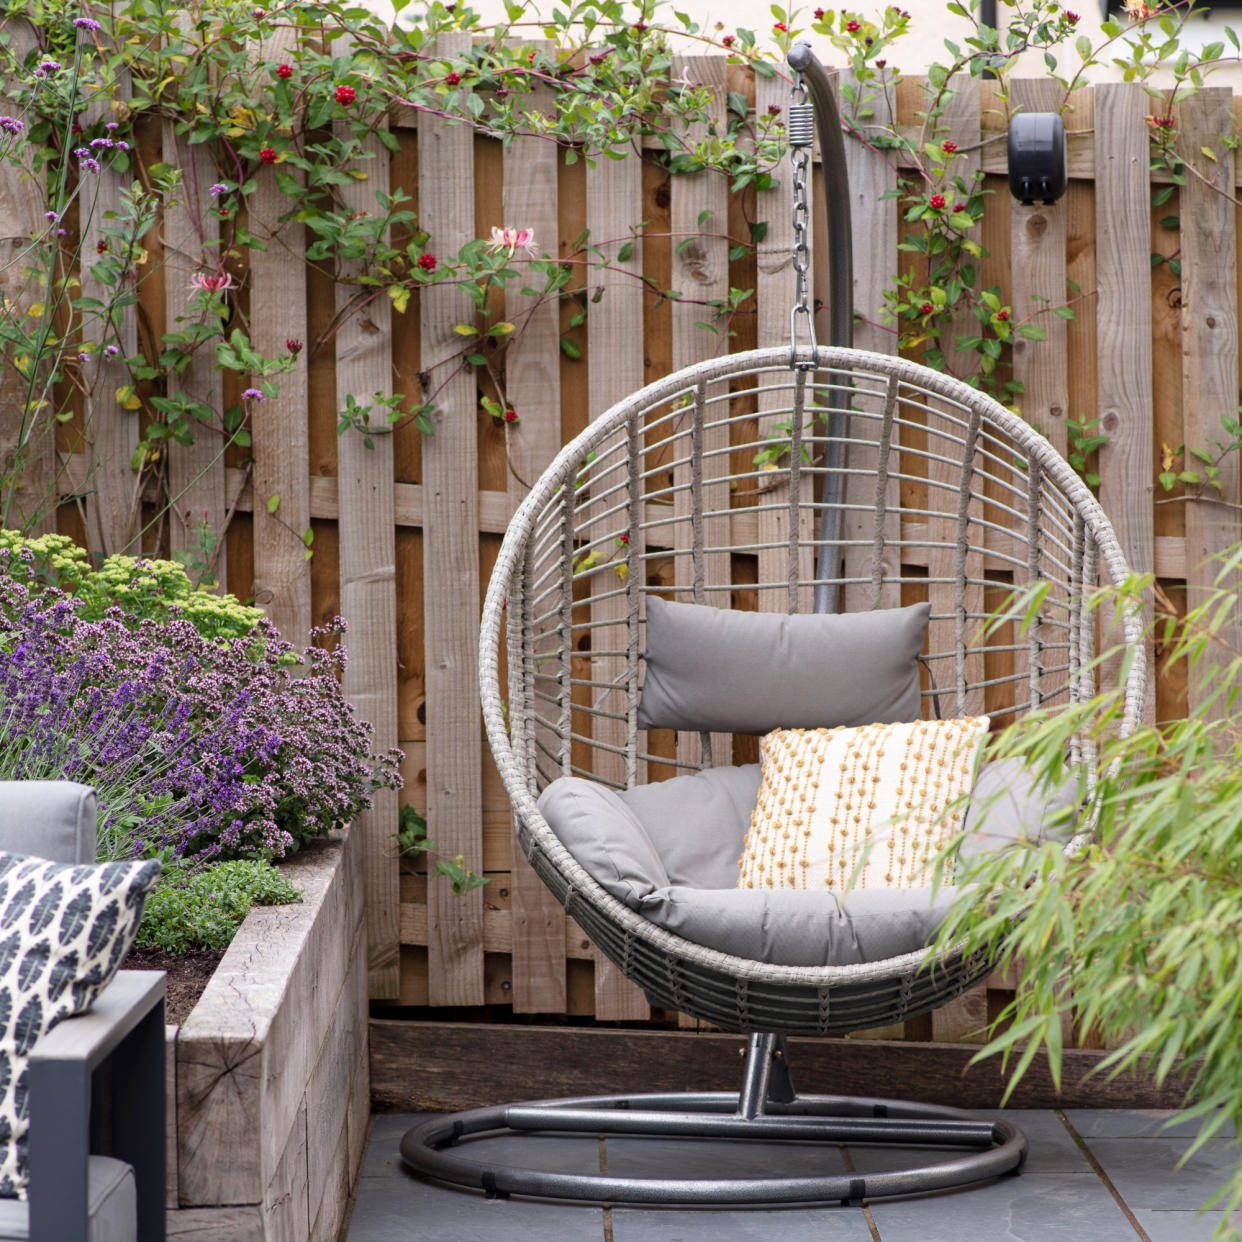  Hanging egg chair in garden patio against fencing. 